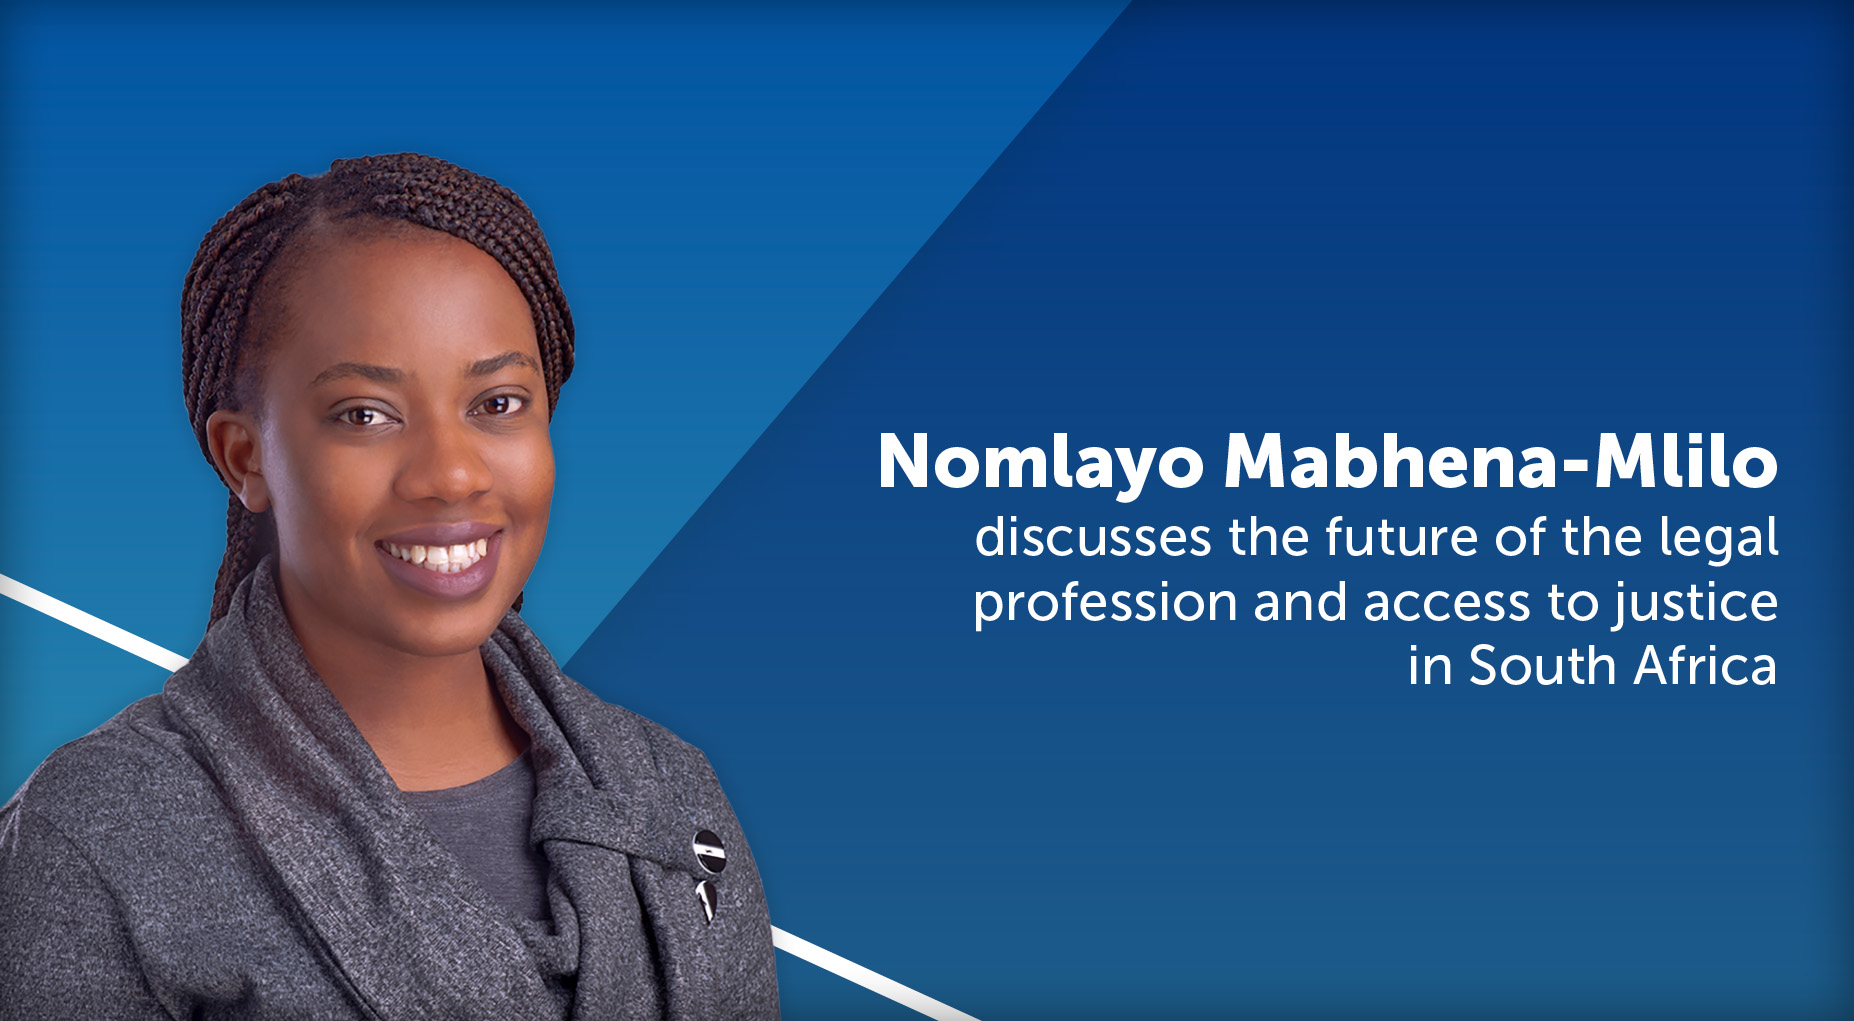 Nomlayo Mabhena-Mlilo discusses the future of the legal profession and access to justice in South Africa